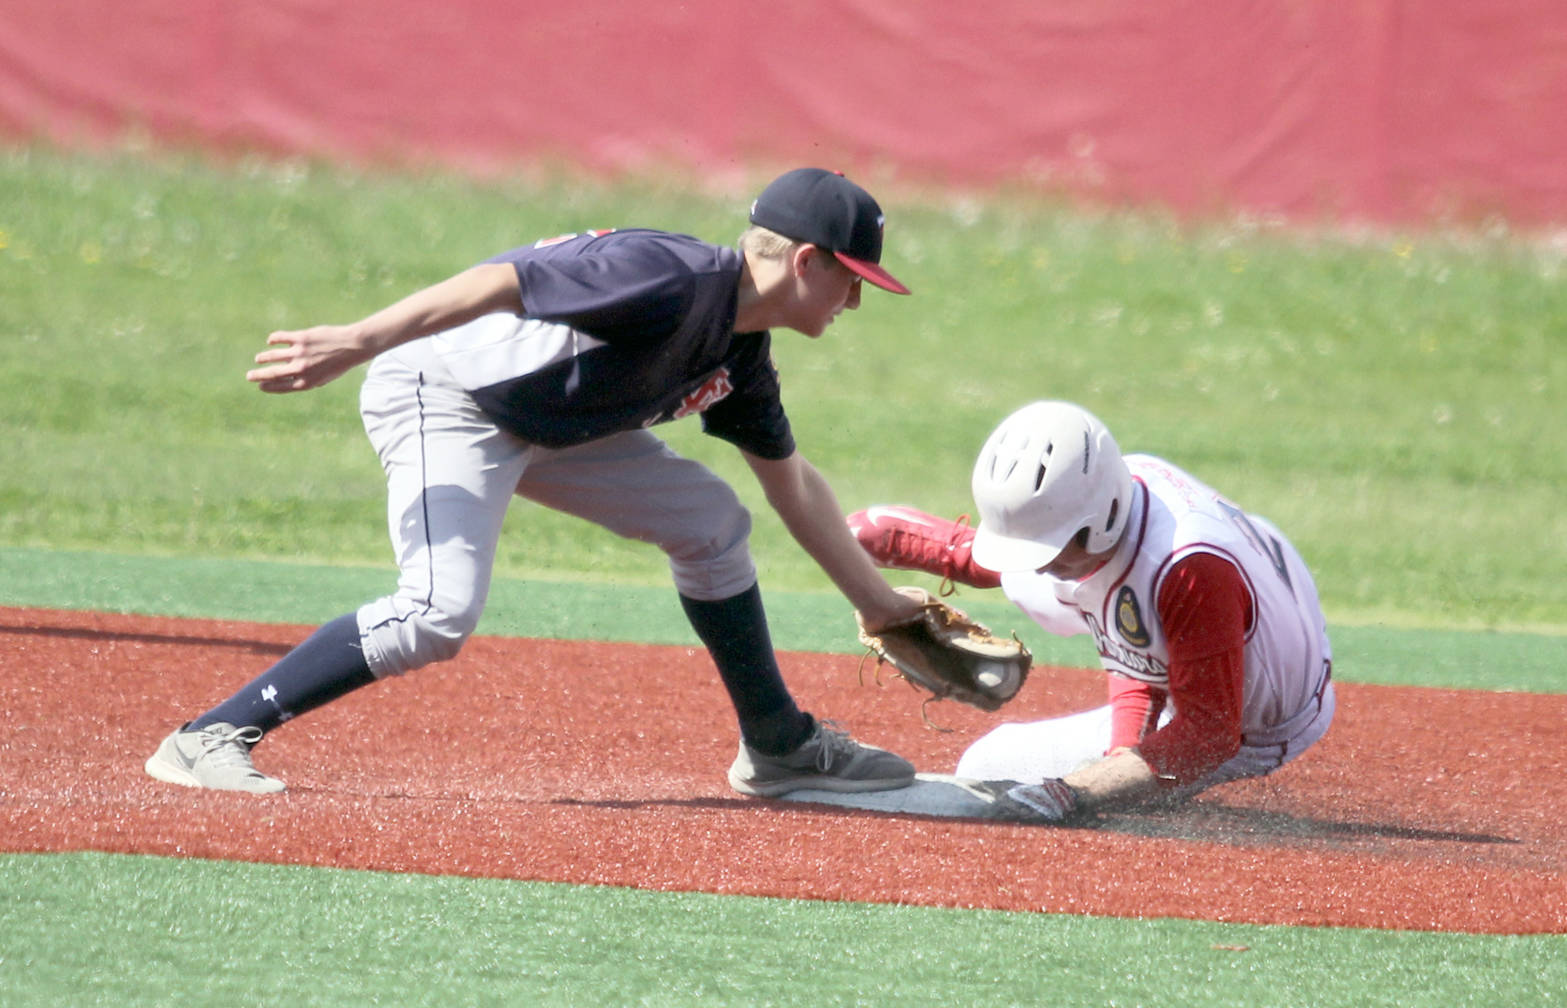 Kenai infielder Porter Fannon tries to tag Wasilla’s Ben Werner at second during a 13-3 loss to the Road Warriors on Wednesday, June 14, 2017, at Wasilla High School. (Photo by Jeremiah Bartz/Frontiersman)